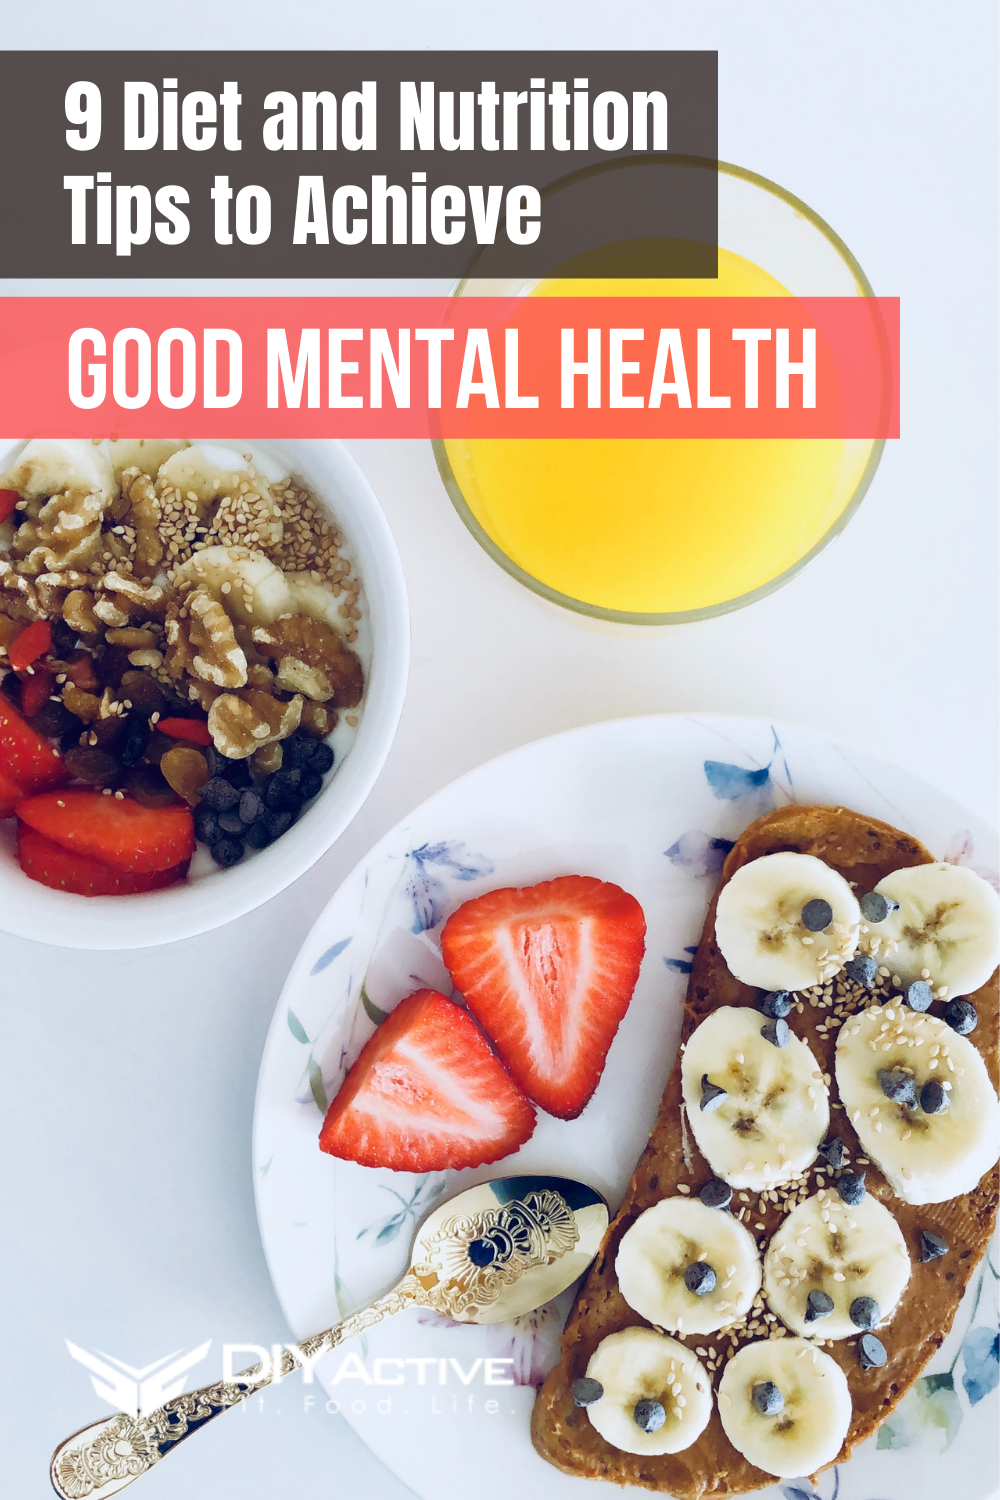 9 Diet and Nutrition Tips to Achieve Good Mental Health